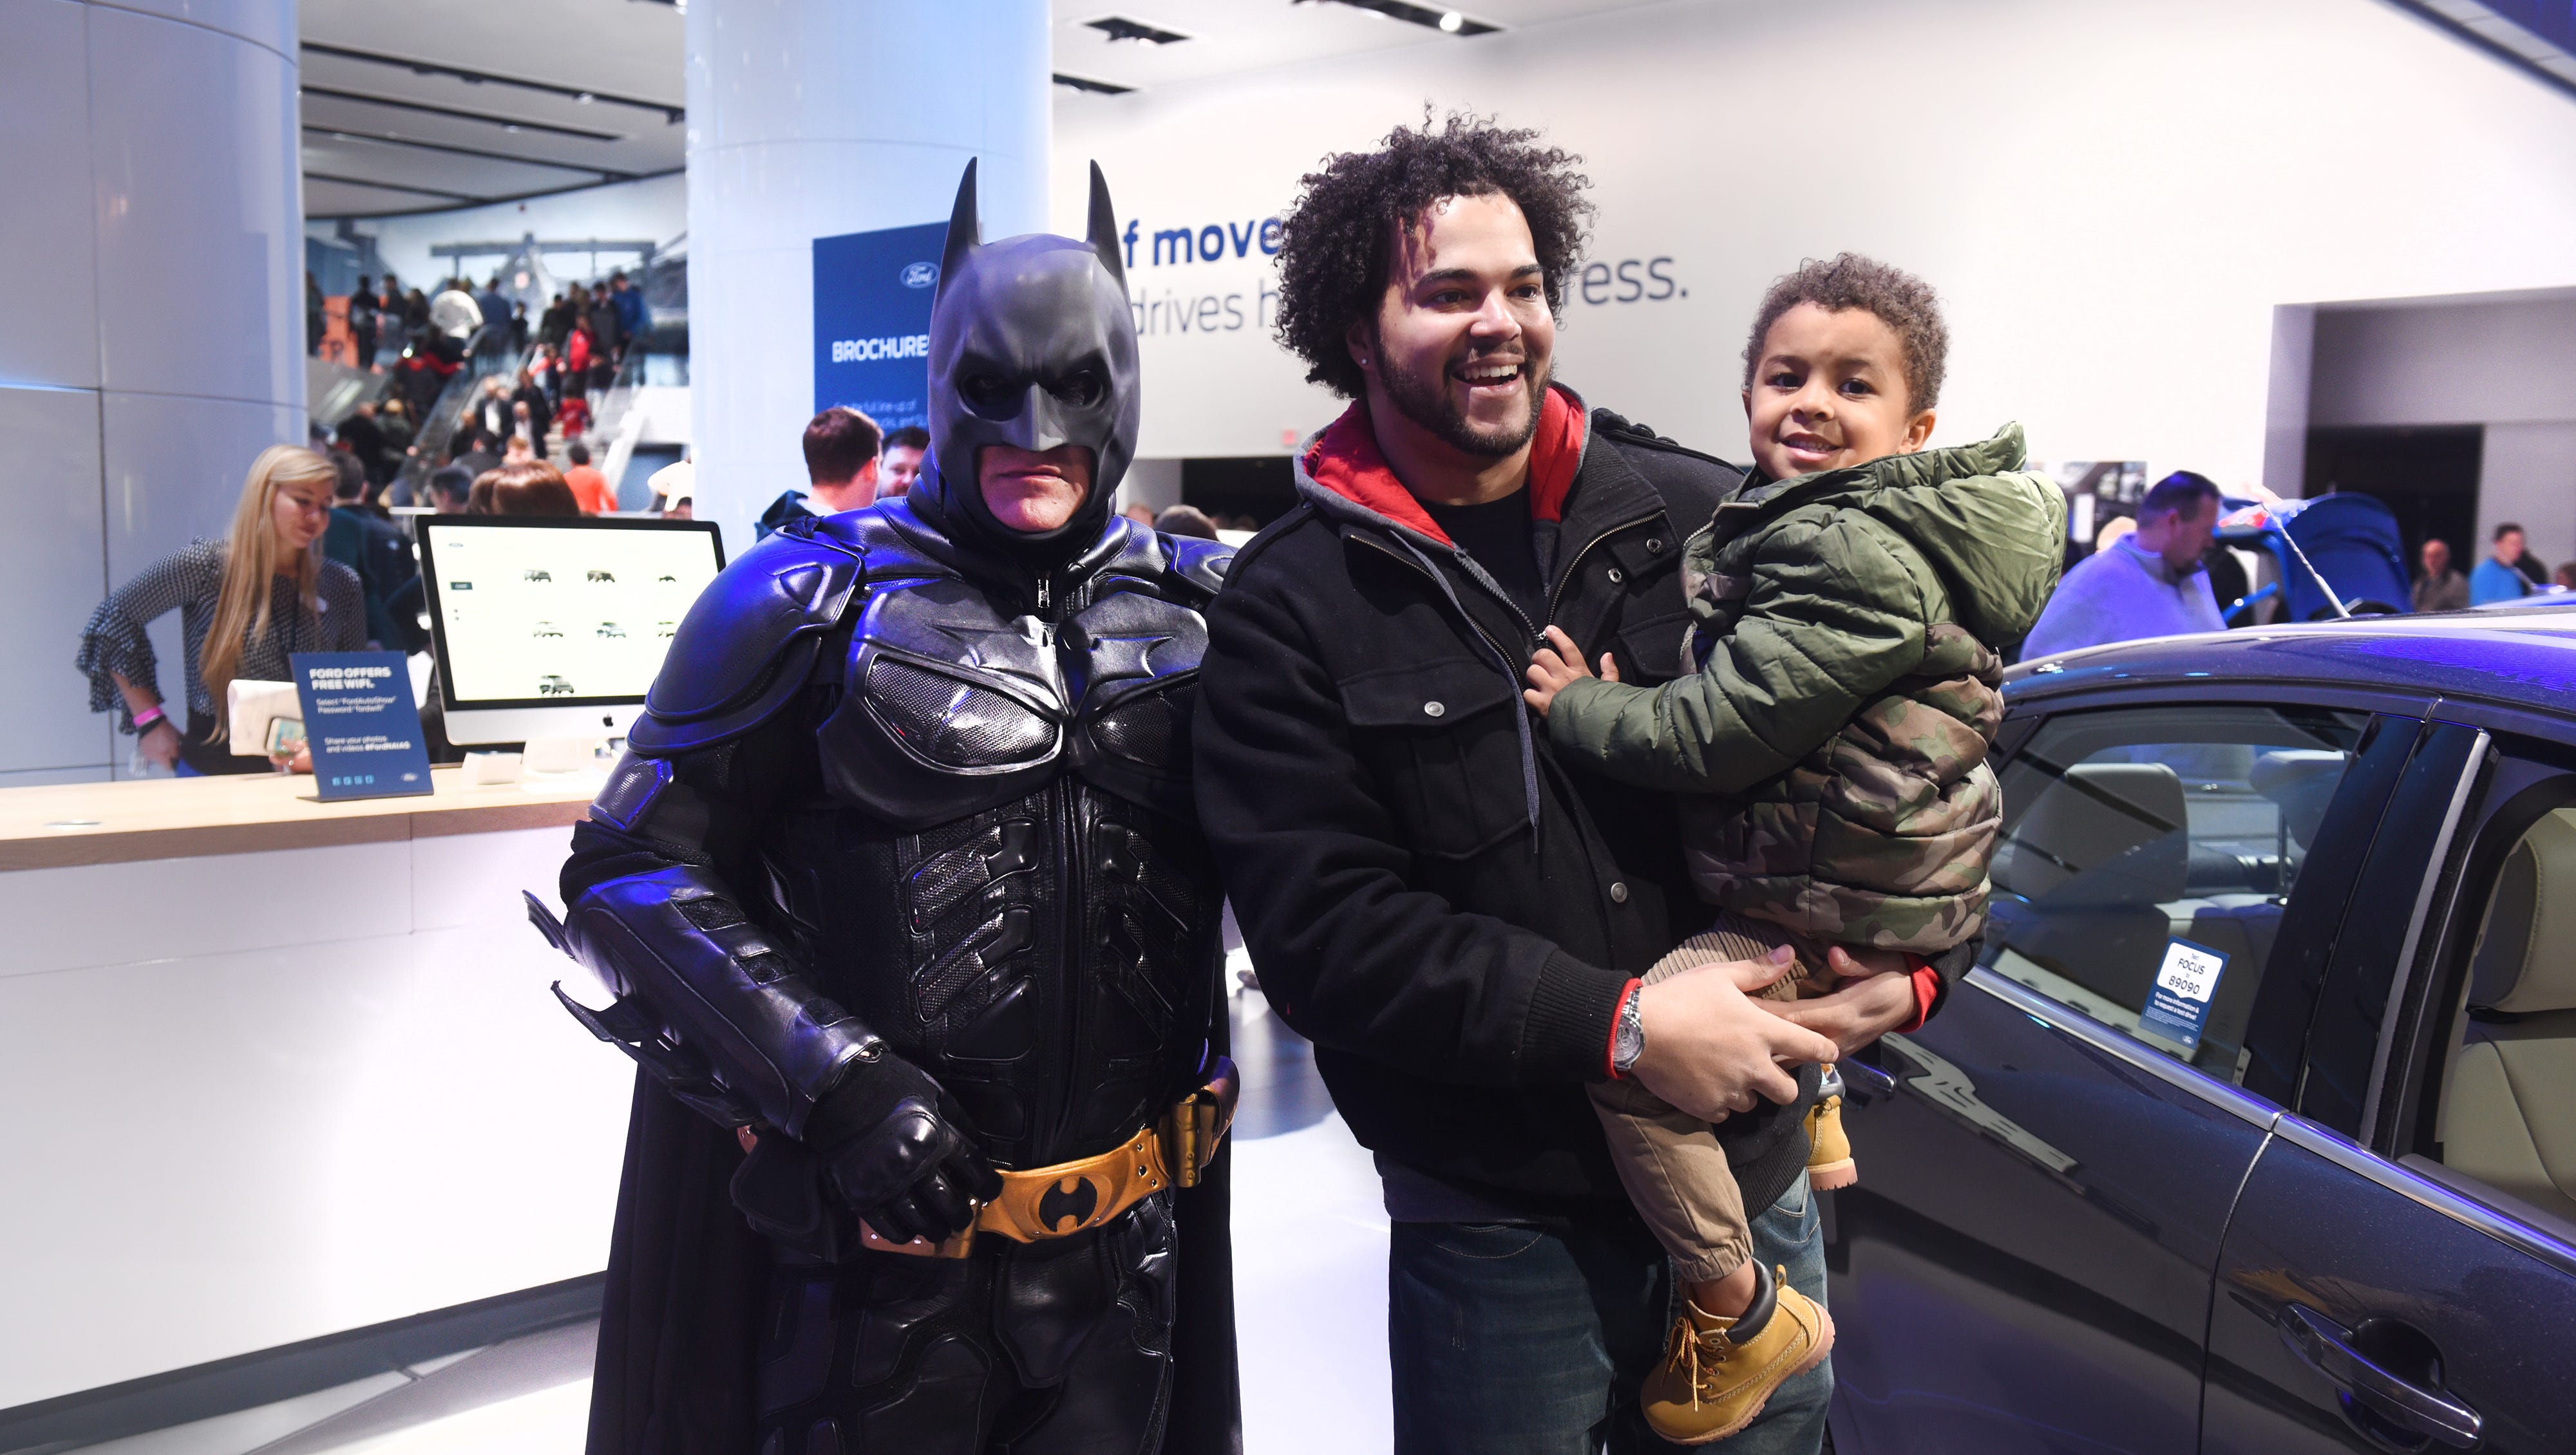 Steven Williamson (center), of Detroit, holds his son Kayden was they pose with Batman at the Ford display on Saturday January 20, 2018.